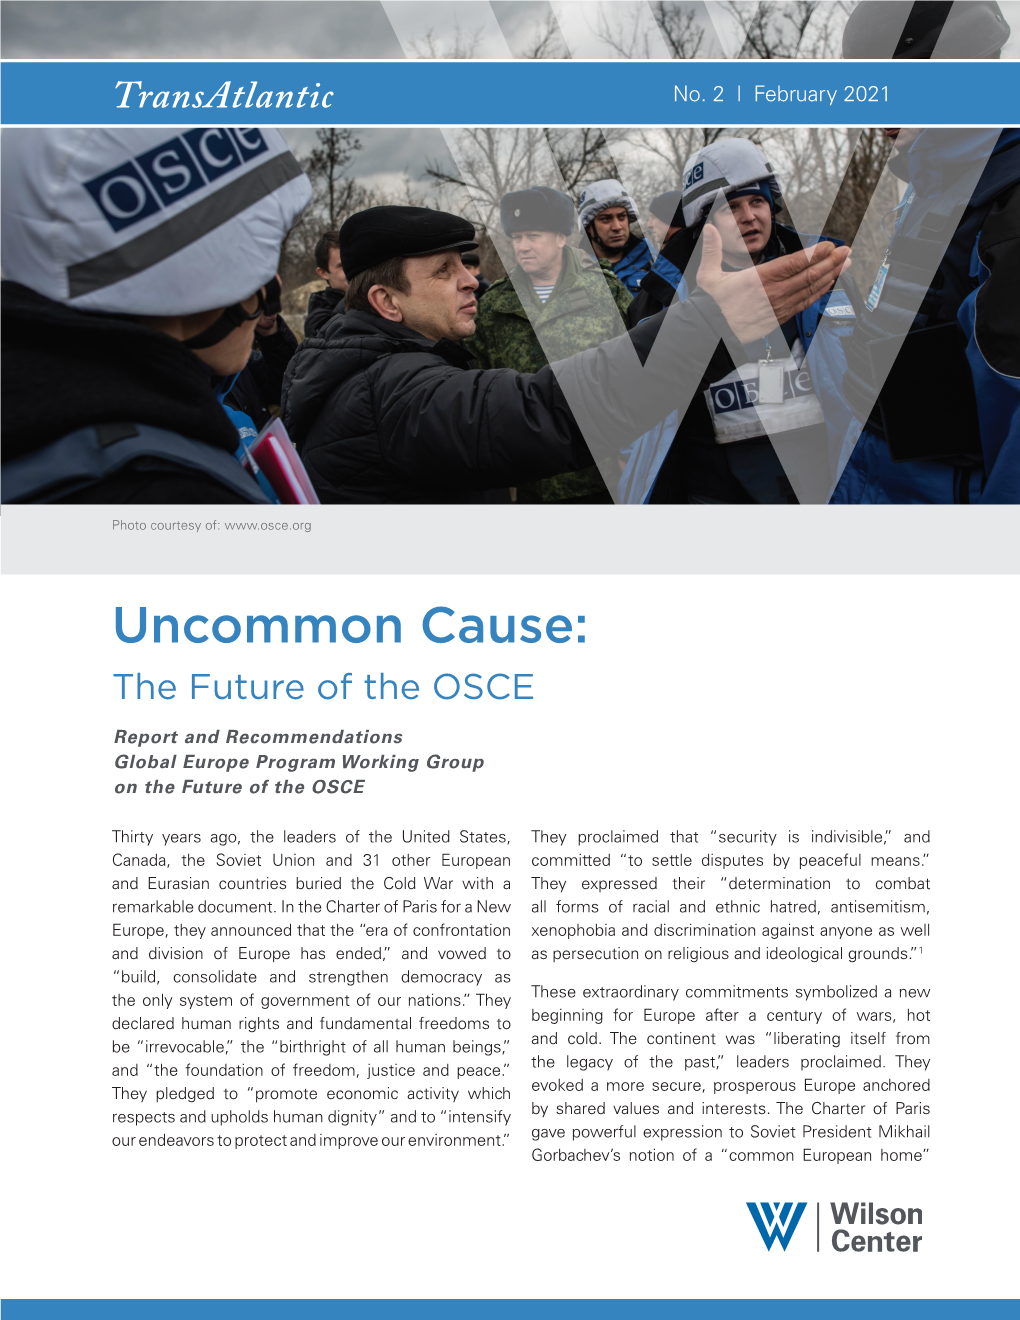 Uncommon Cause: the Future of the OSCE